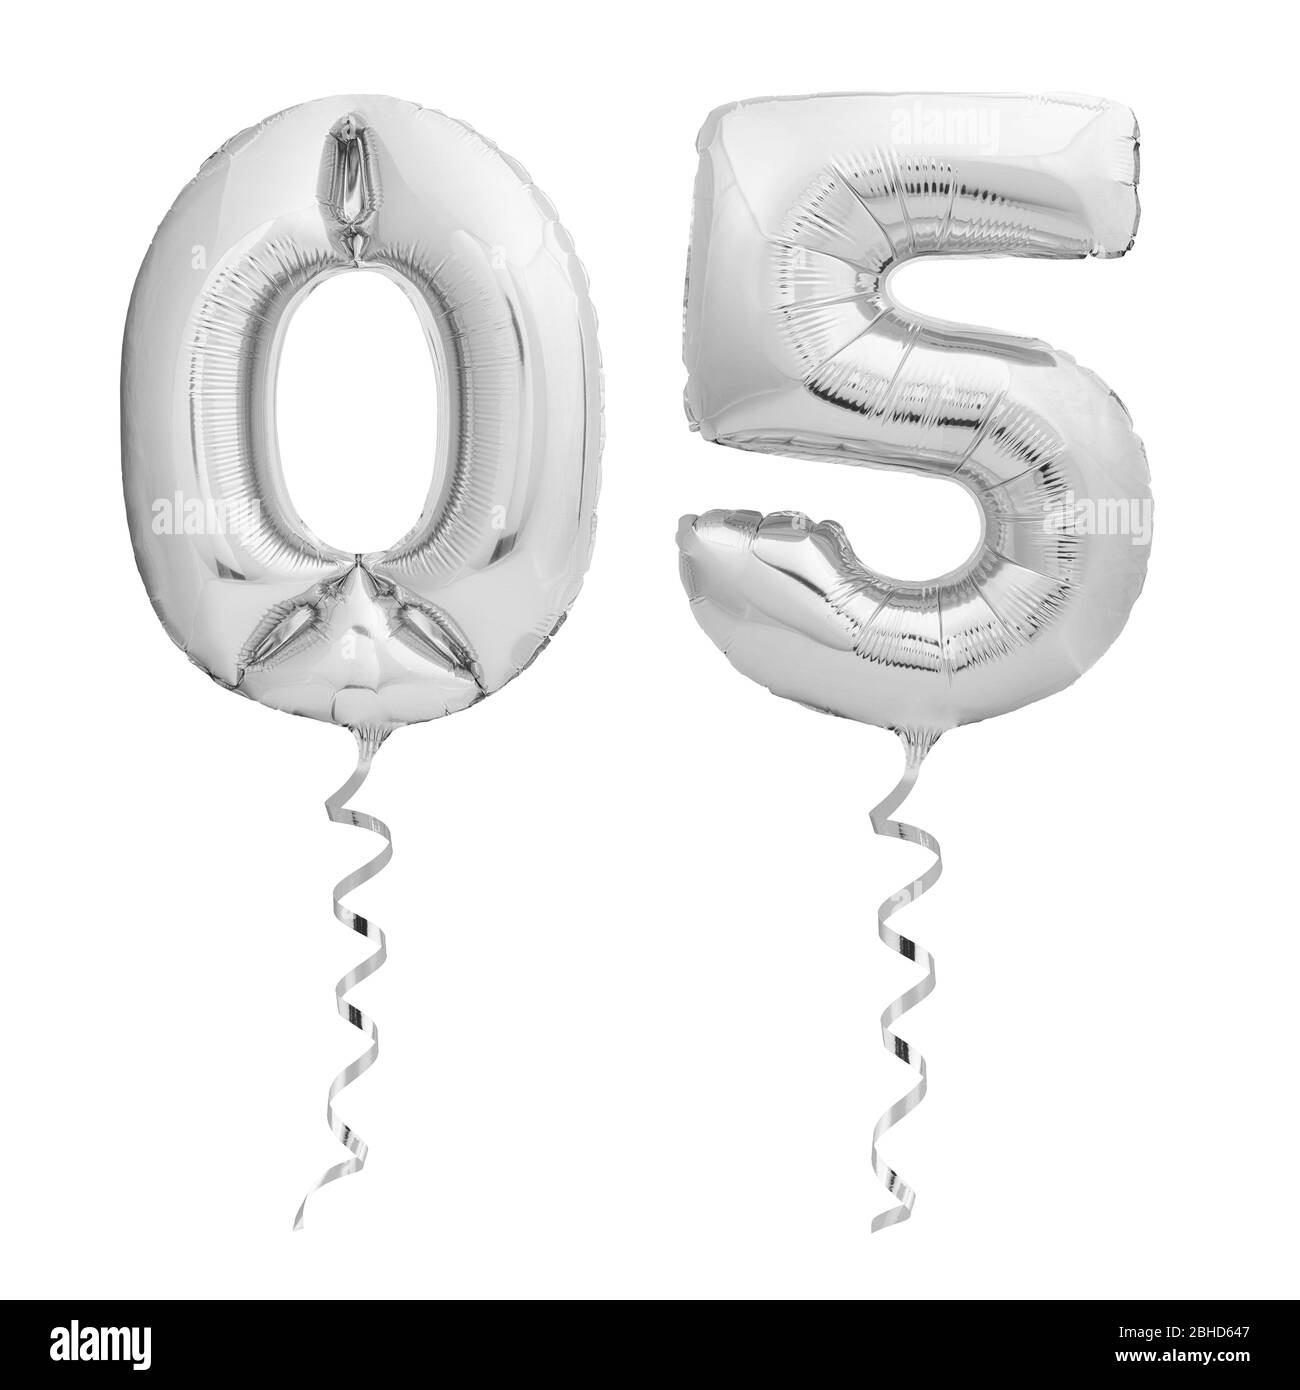 Silver number 05 made of inflatable party balloons with silver ribbons isolated on white background Stock Photo